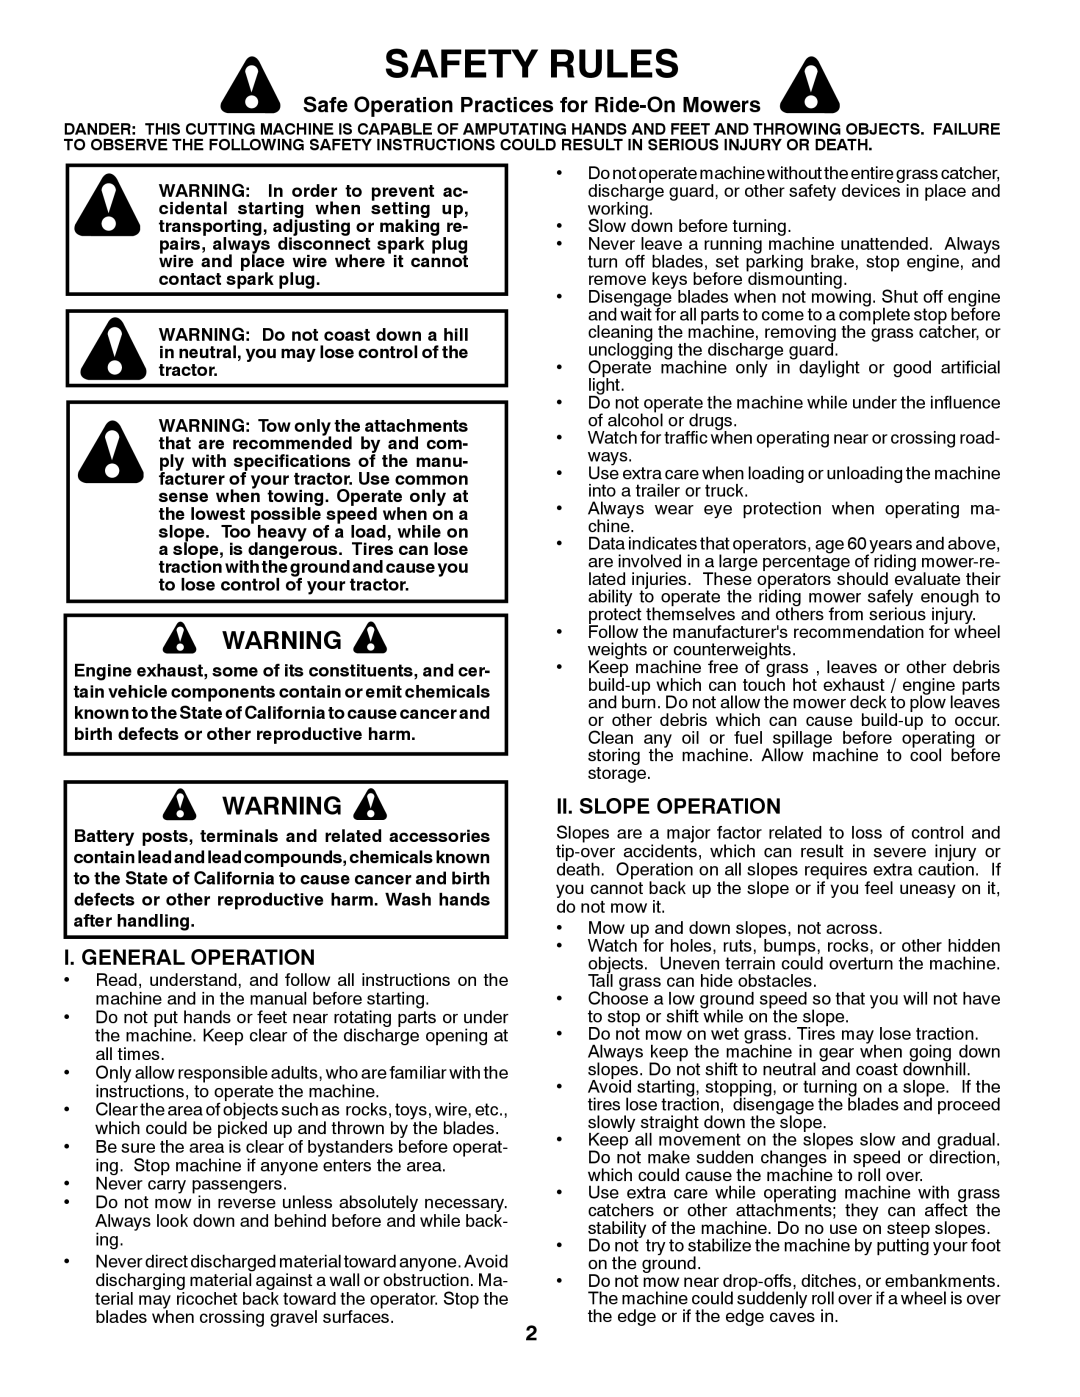 Husqvarna GTH2648 Safety Rules, Safe Operation Practices for Ride-OnMowers, I. General Operation, Ii. Slope Operation 